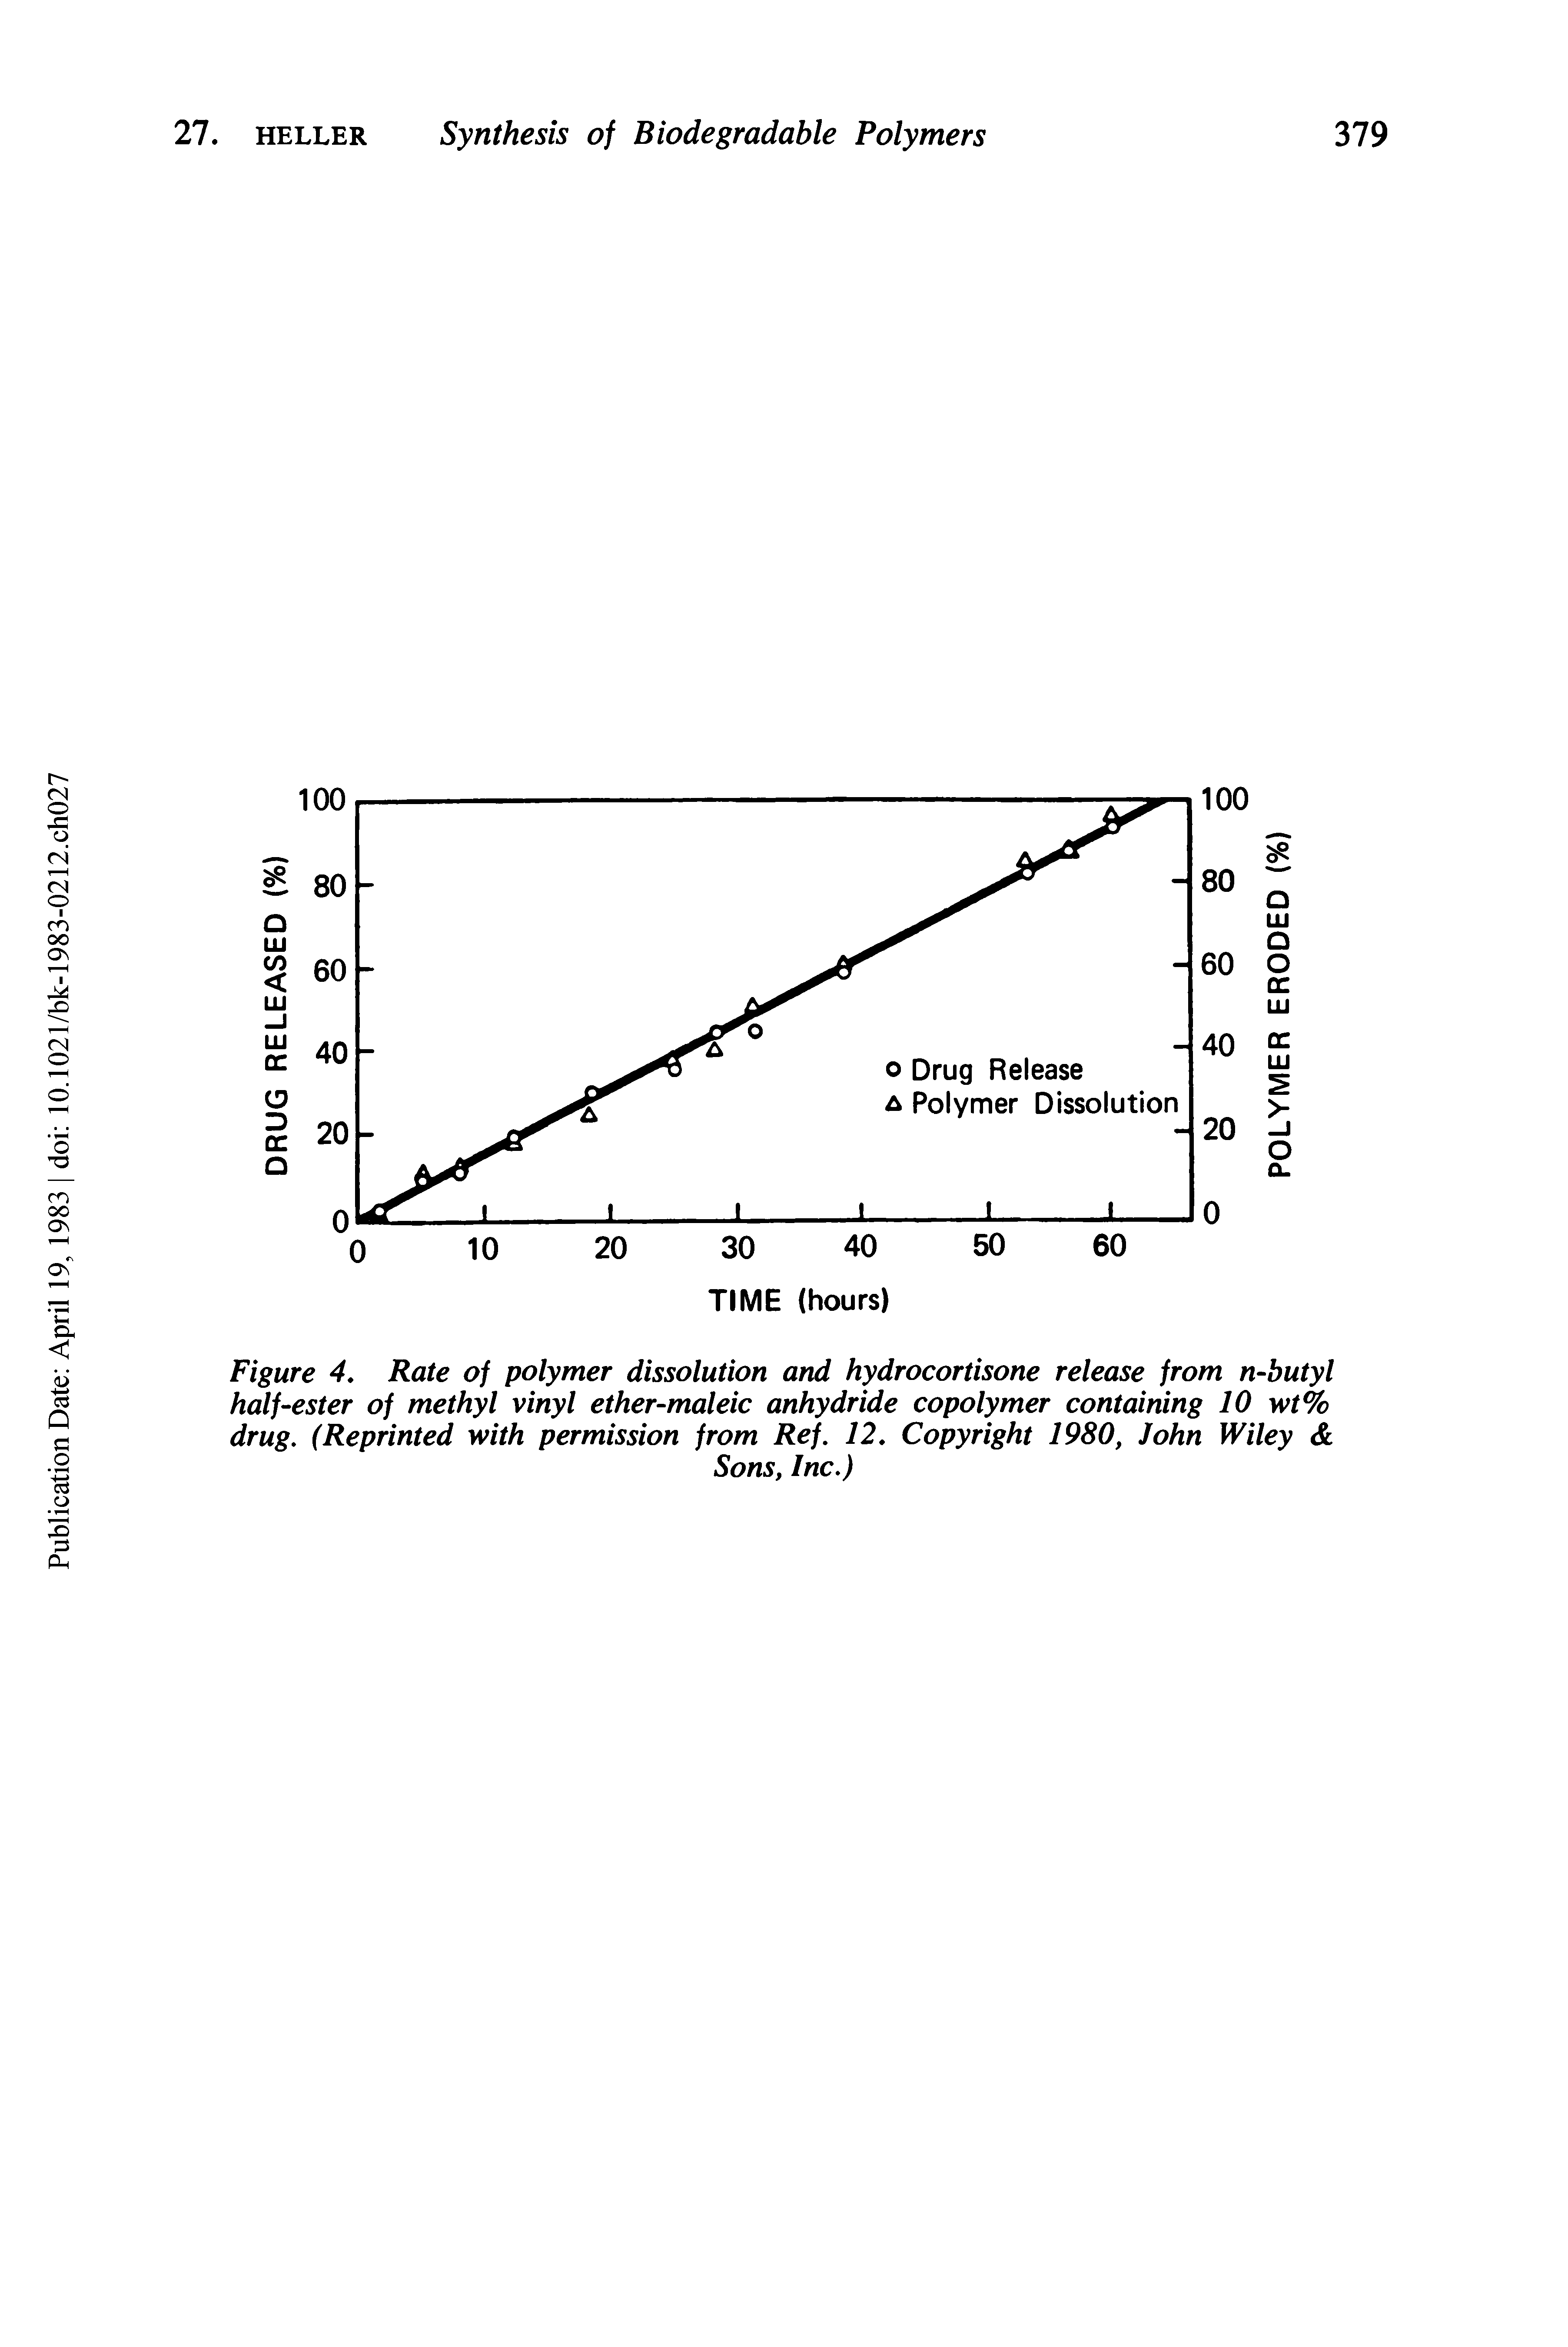 Figure 4, Rate of polymer dissolution and hydrocortisone release from n-butyl half-ester of methyl vinyl ether-maleic anhydride copolymer containing 10 wt% drug, (Reprinted with permission from Ref. 12. Copyright 1980, John Wiley ...